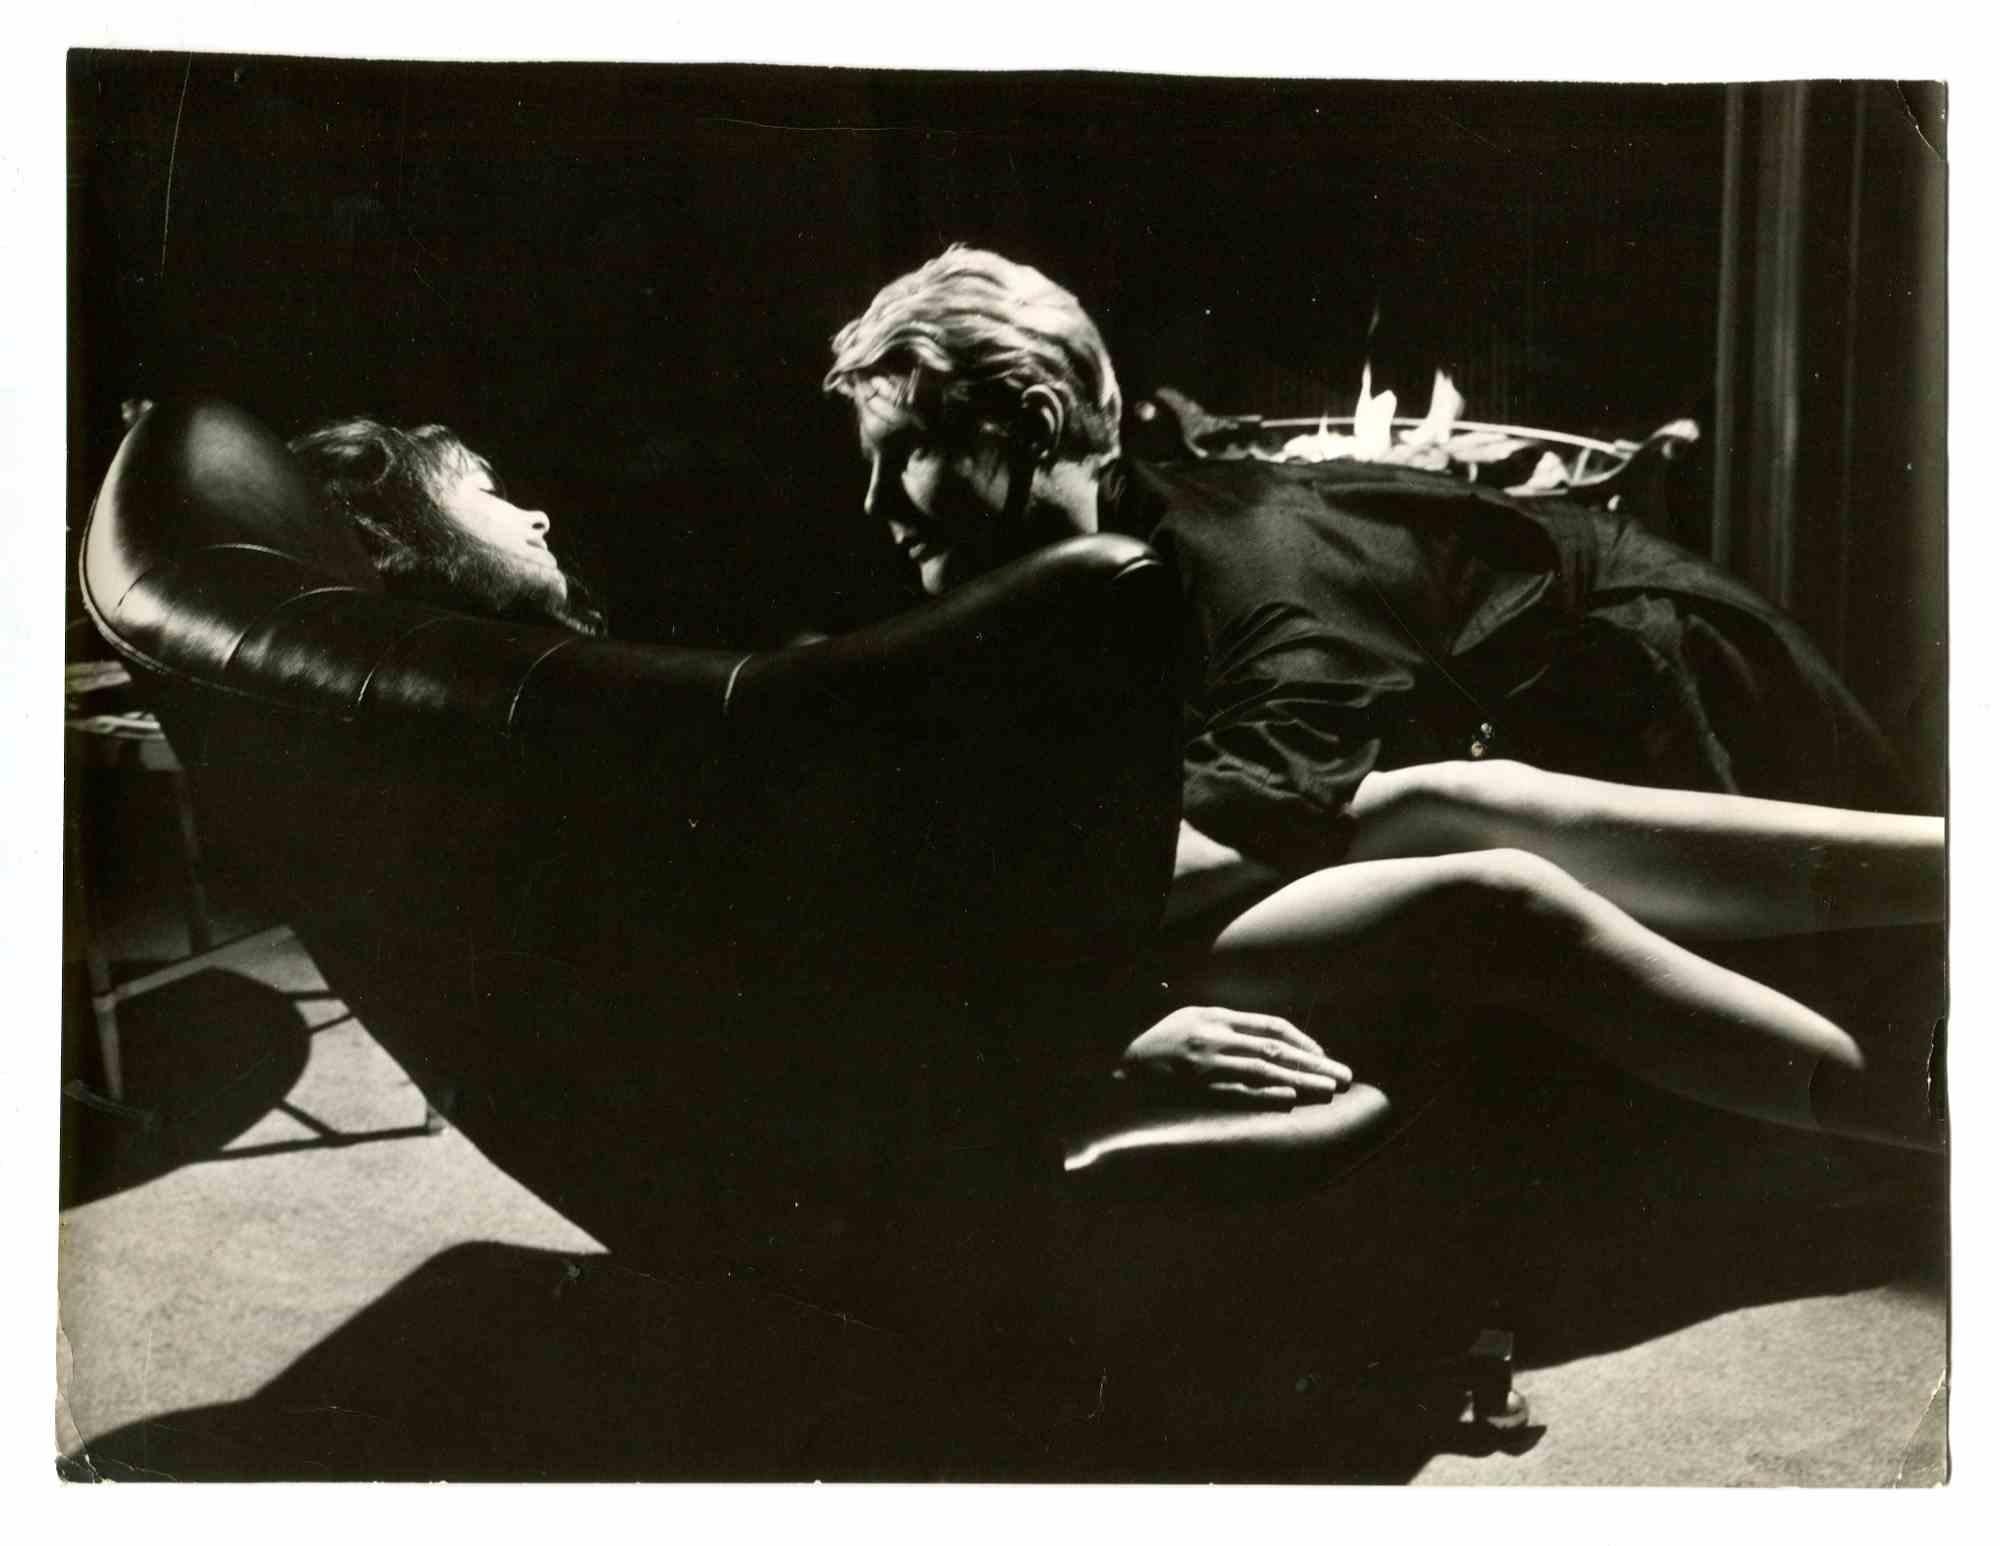 Unknown Figurative Photograph - Sarah Miles and James Fox in The Servant - Vintage Photo - 1963